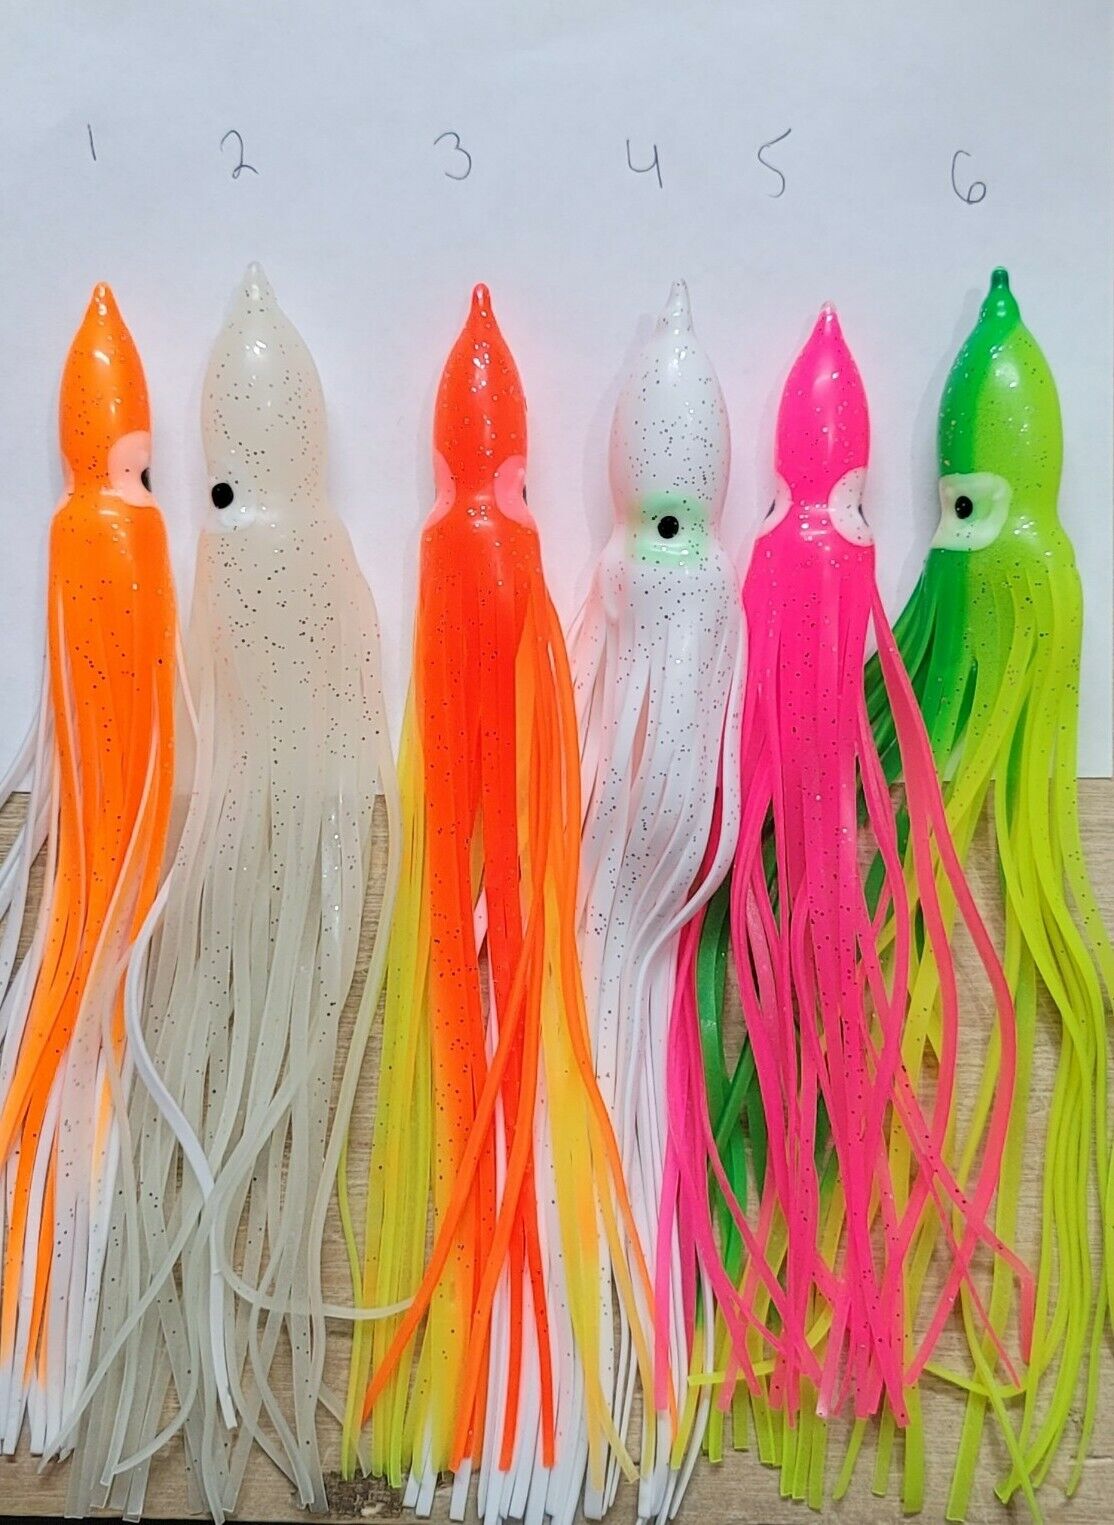 9" Inch Fishing Squid Hoochie Skirts 5 pack pick a color at checkout Tackle